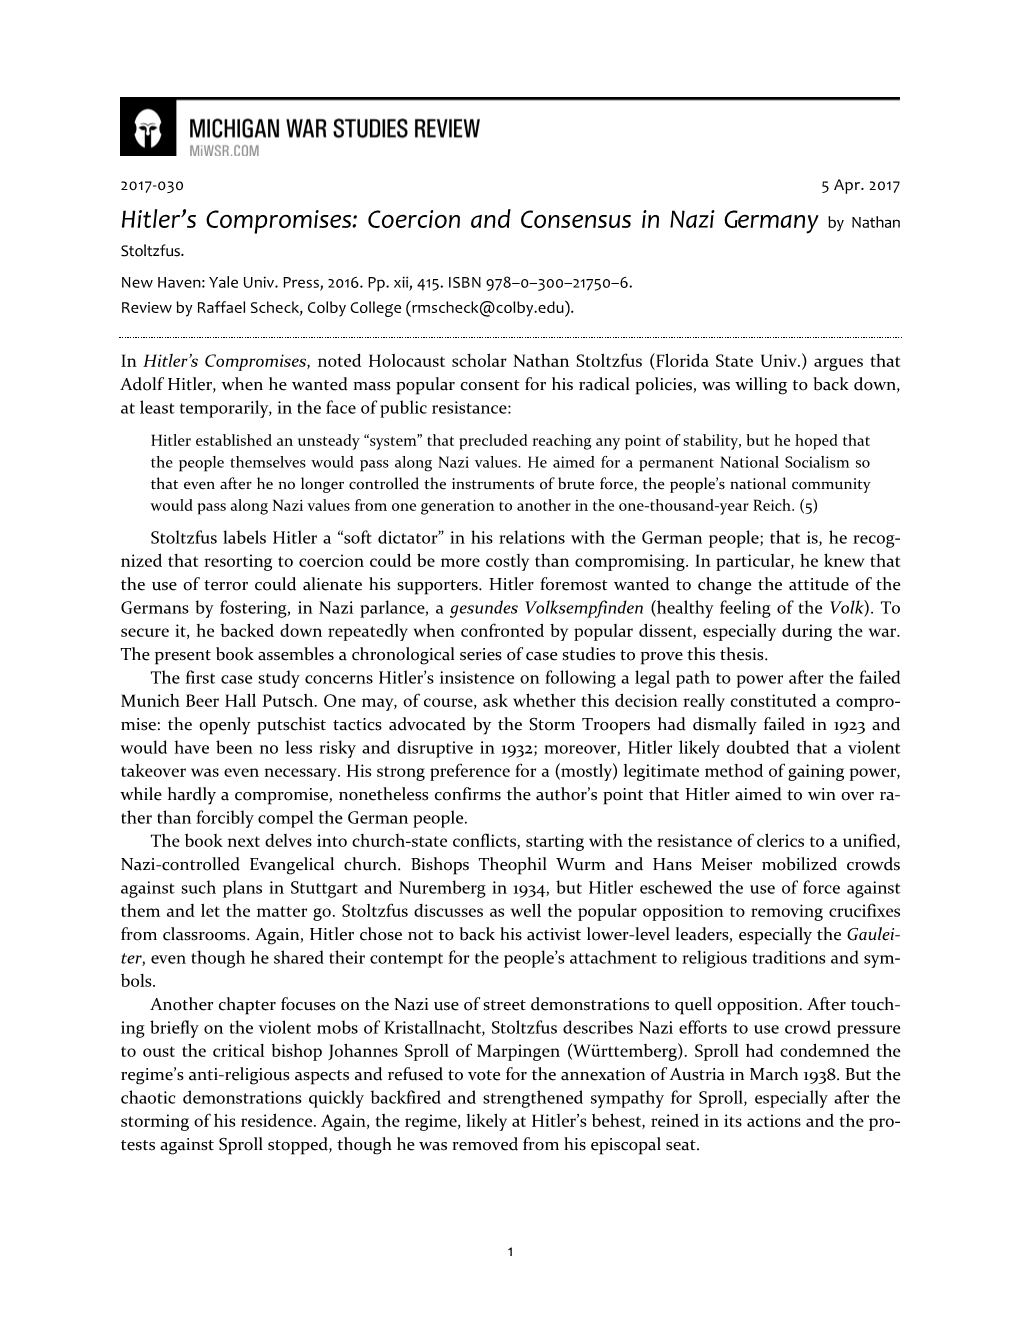 Hitler's Compromises: Coercion and Consensus in Nazi Germany By